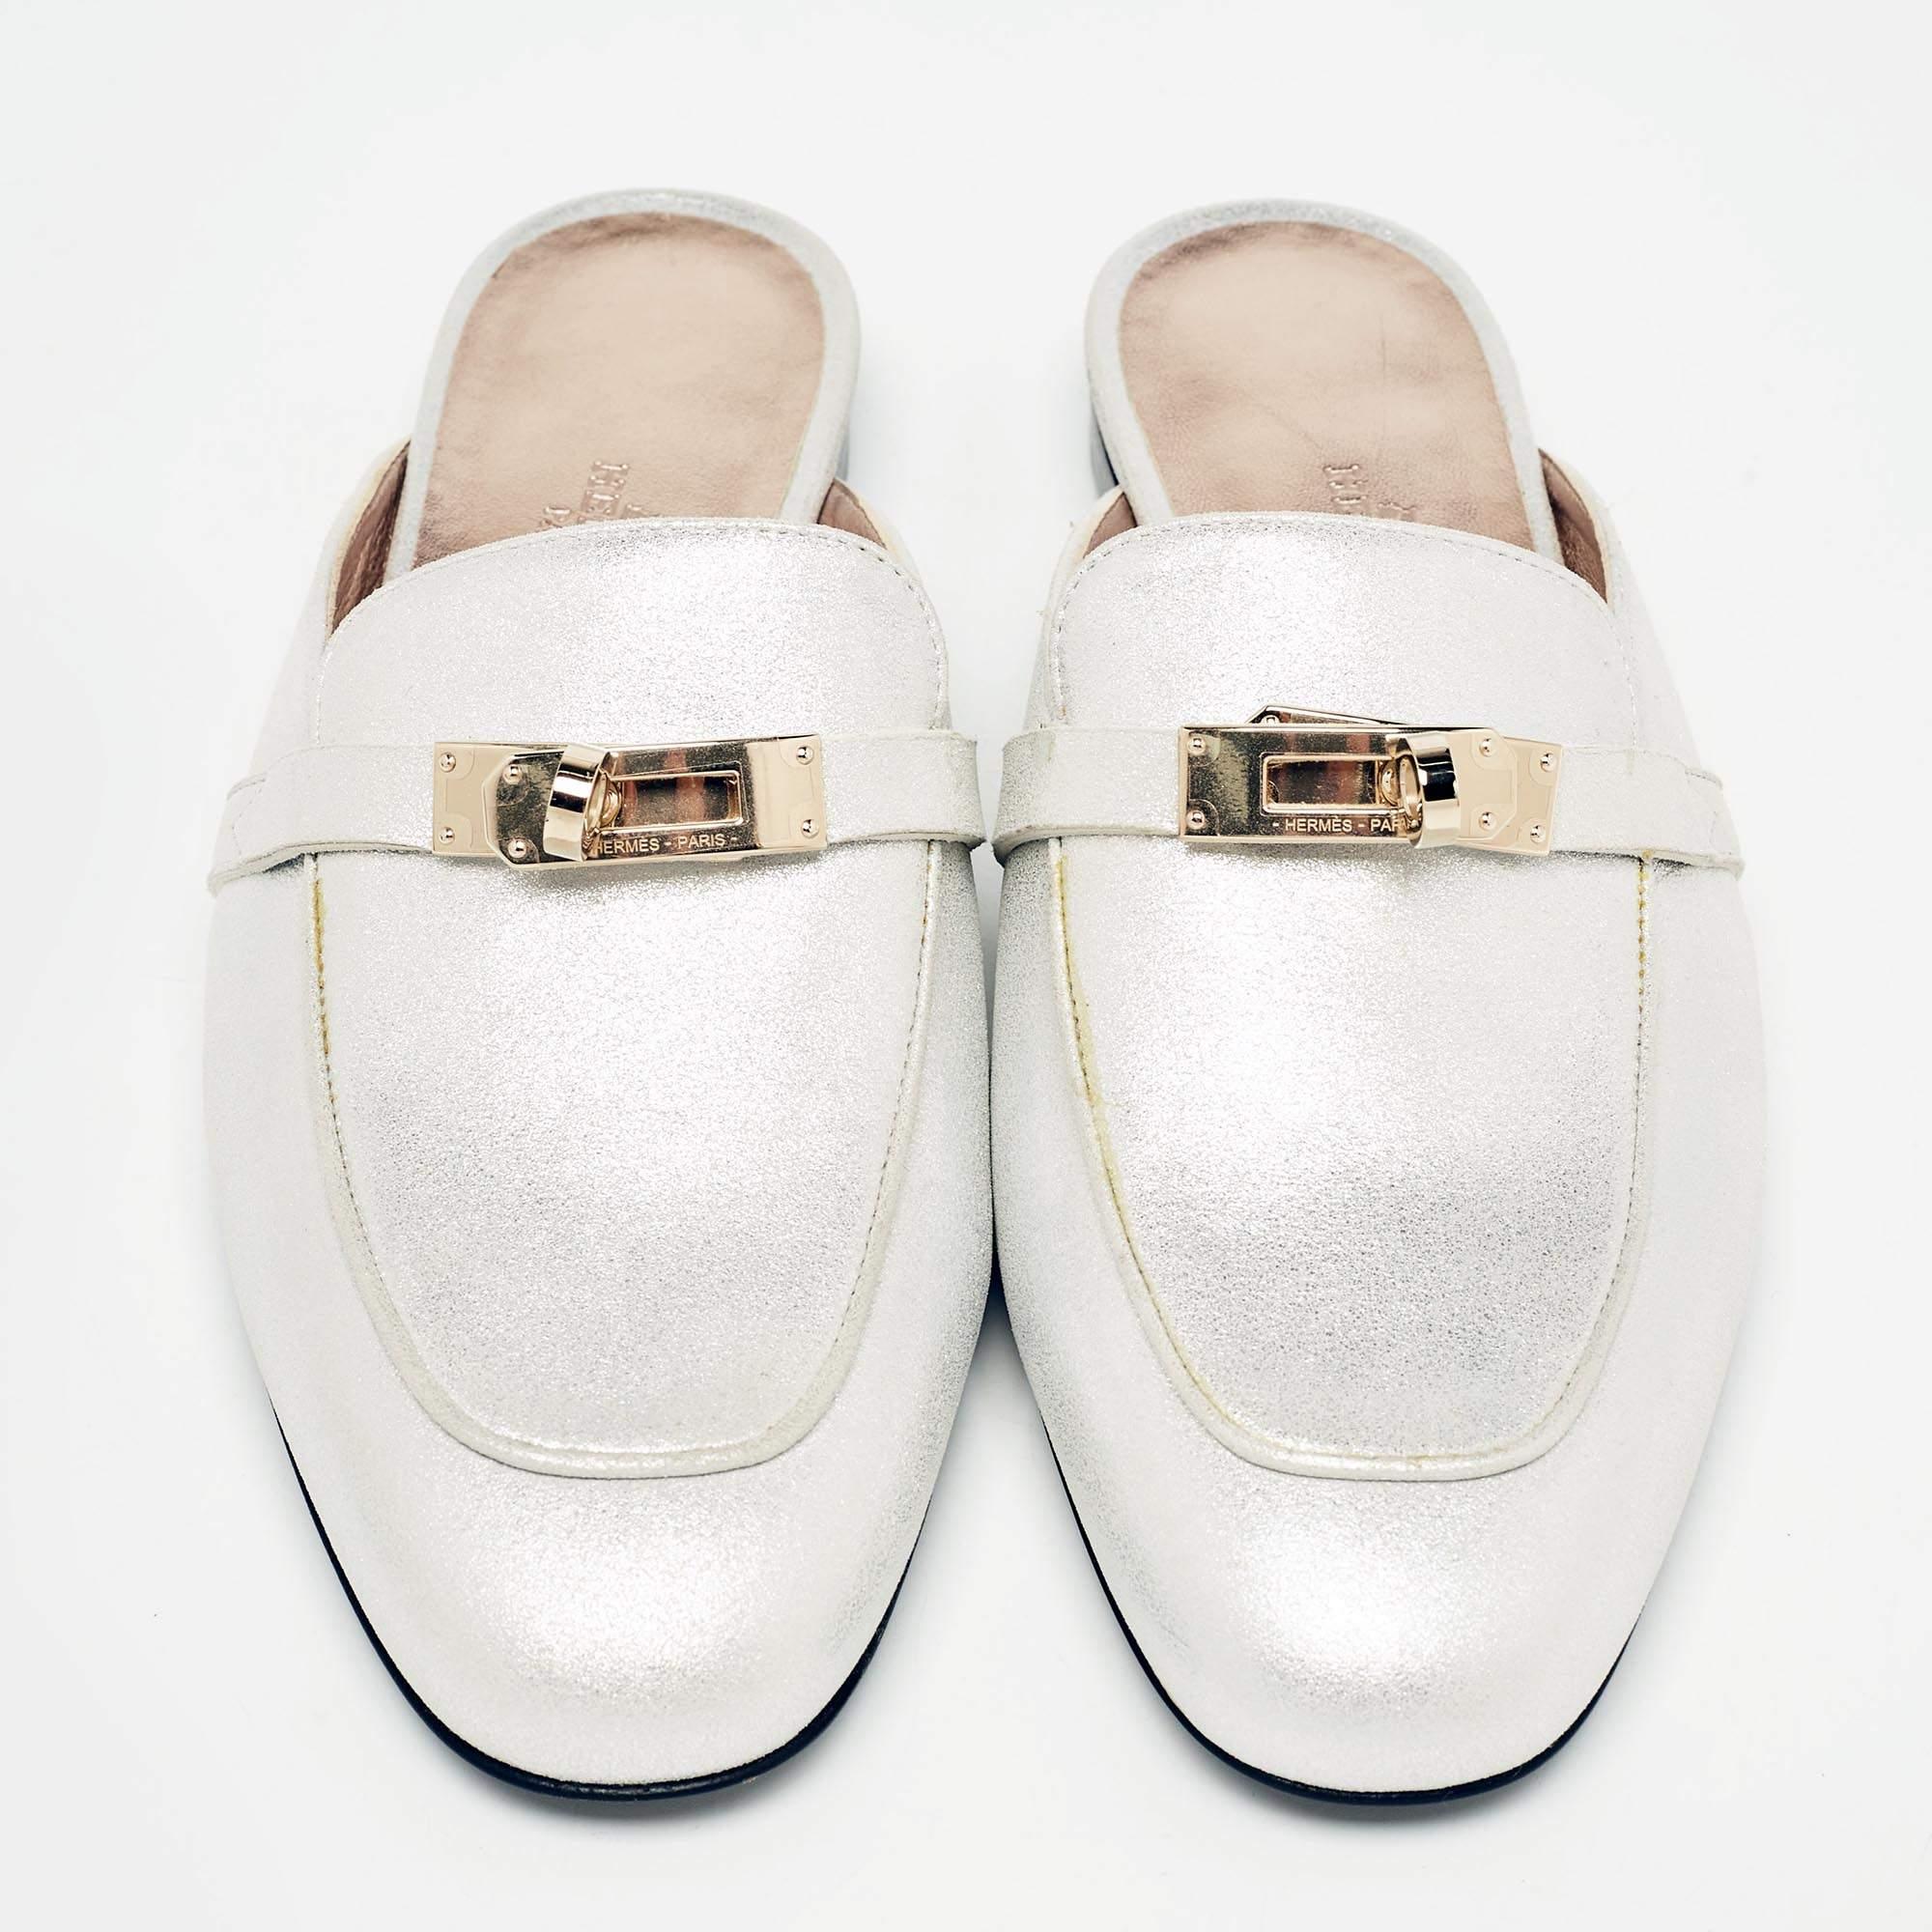 A perfect blend of luxury, style, and comfort, these designer mules are made using quality materials and frame your feet in the most elegant way. They can be paired with a host of outfits from your wardrobe.

Includes: Original Dustbag

